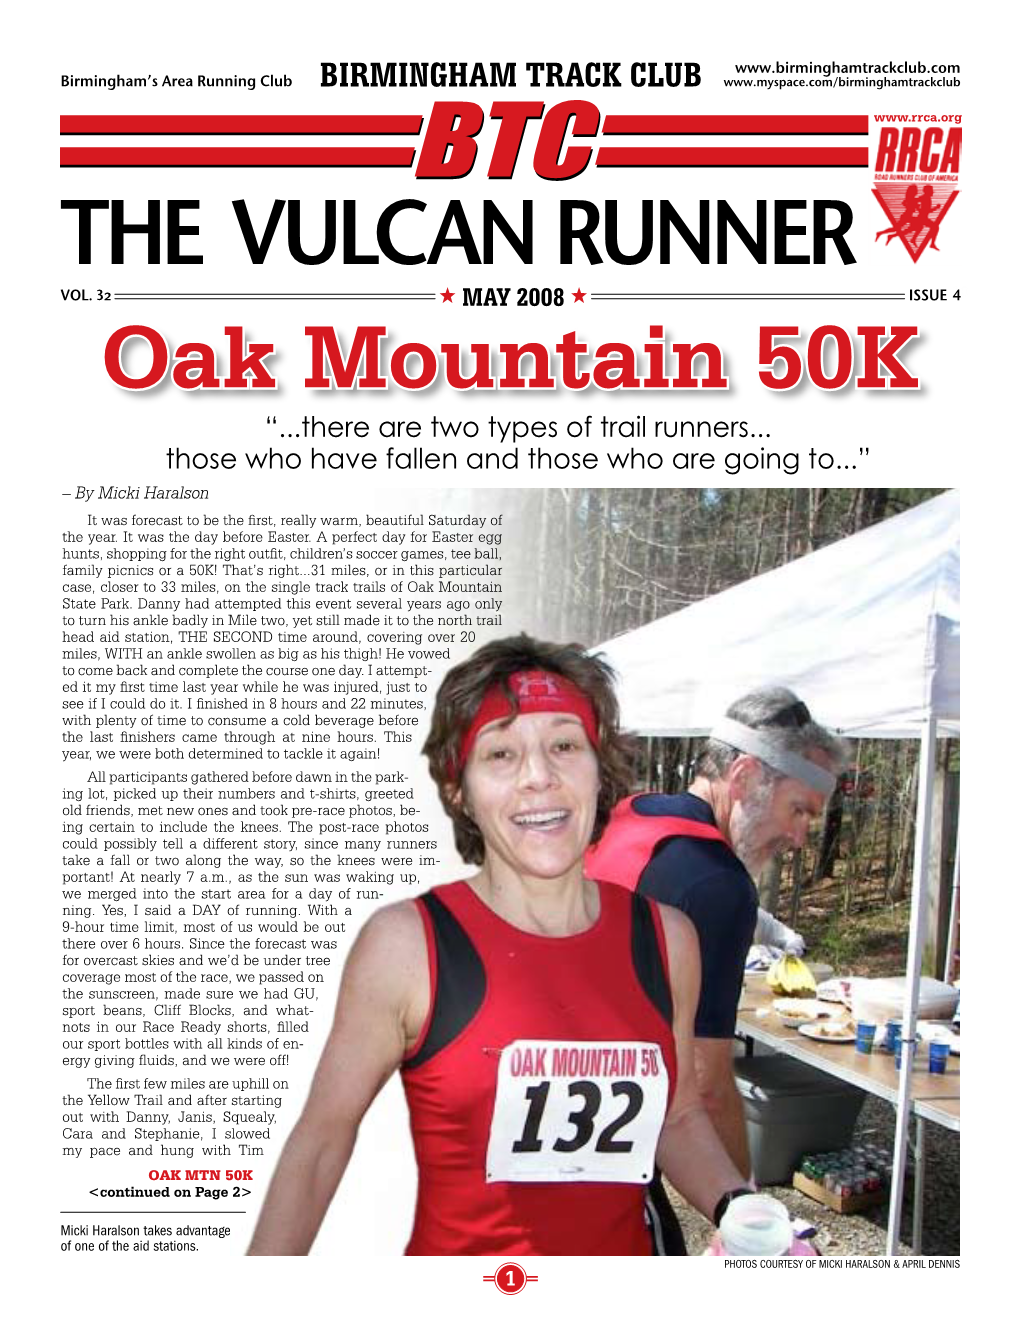 Oak Mountain 50K “...There Are Two Types of Trail Runners